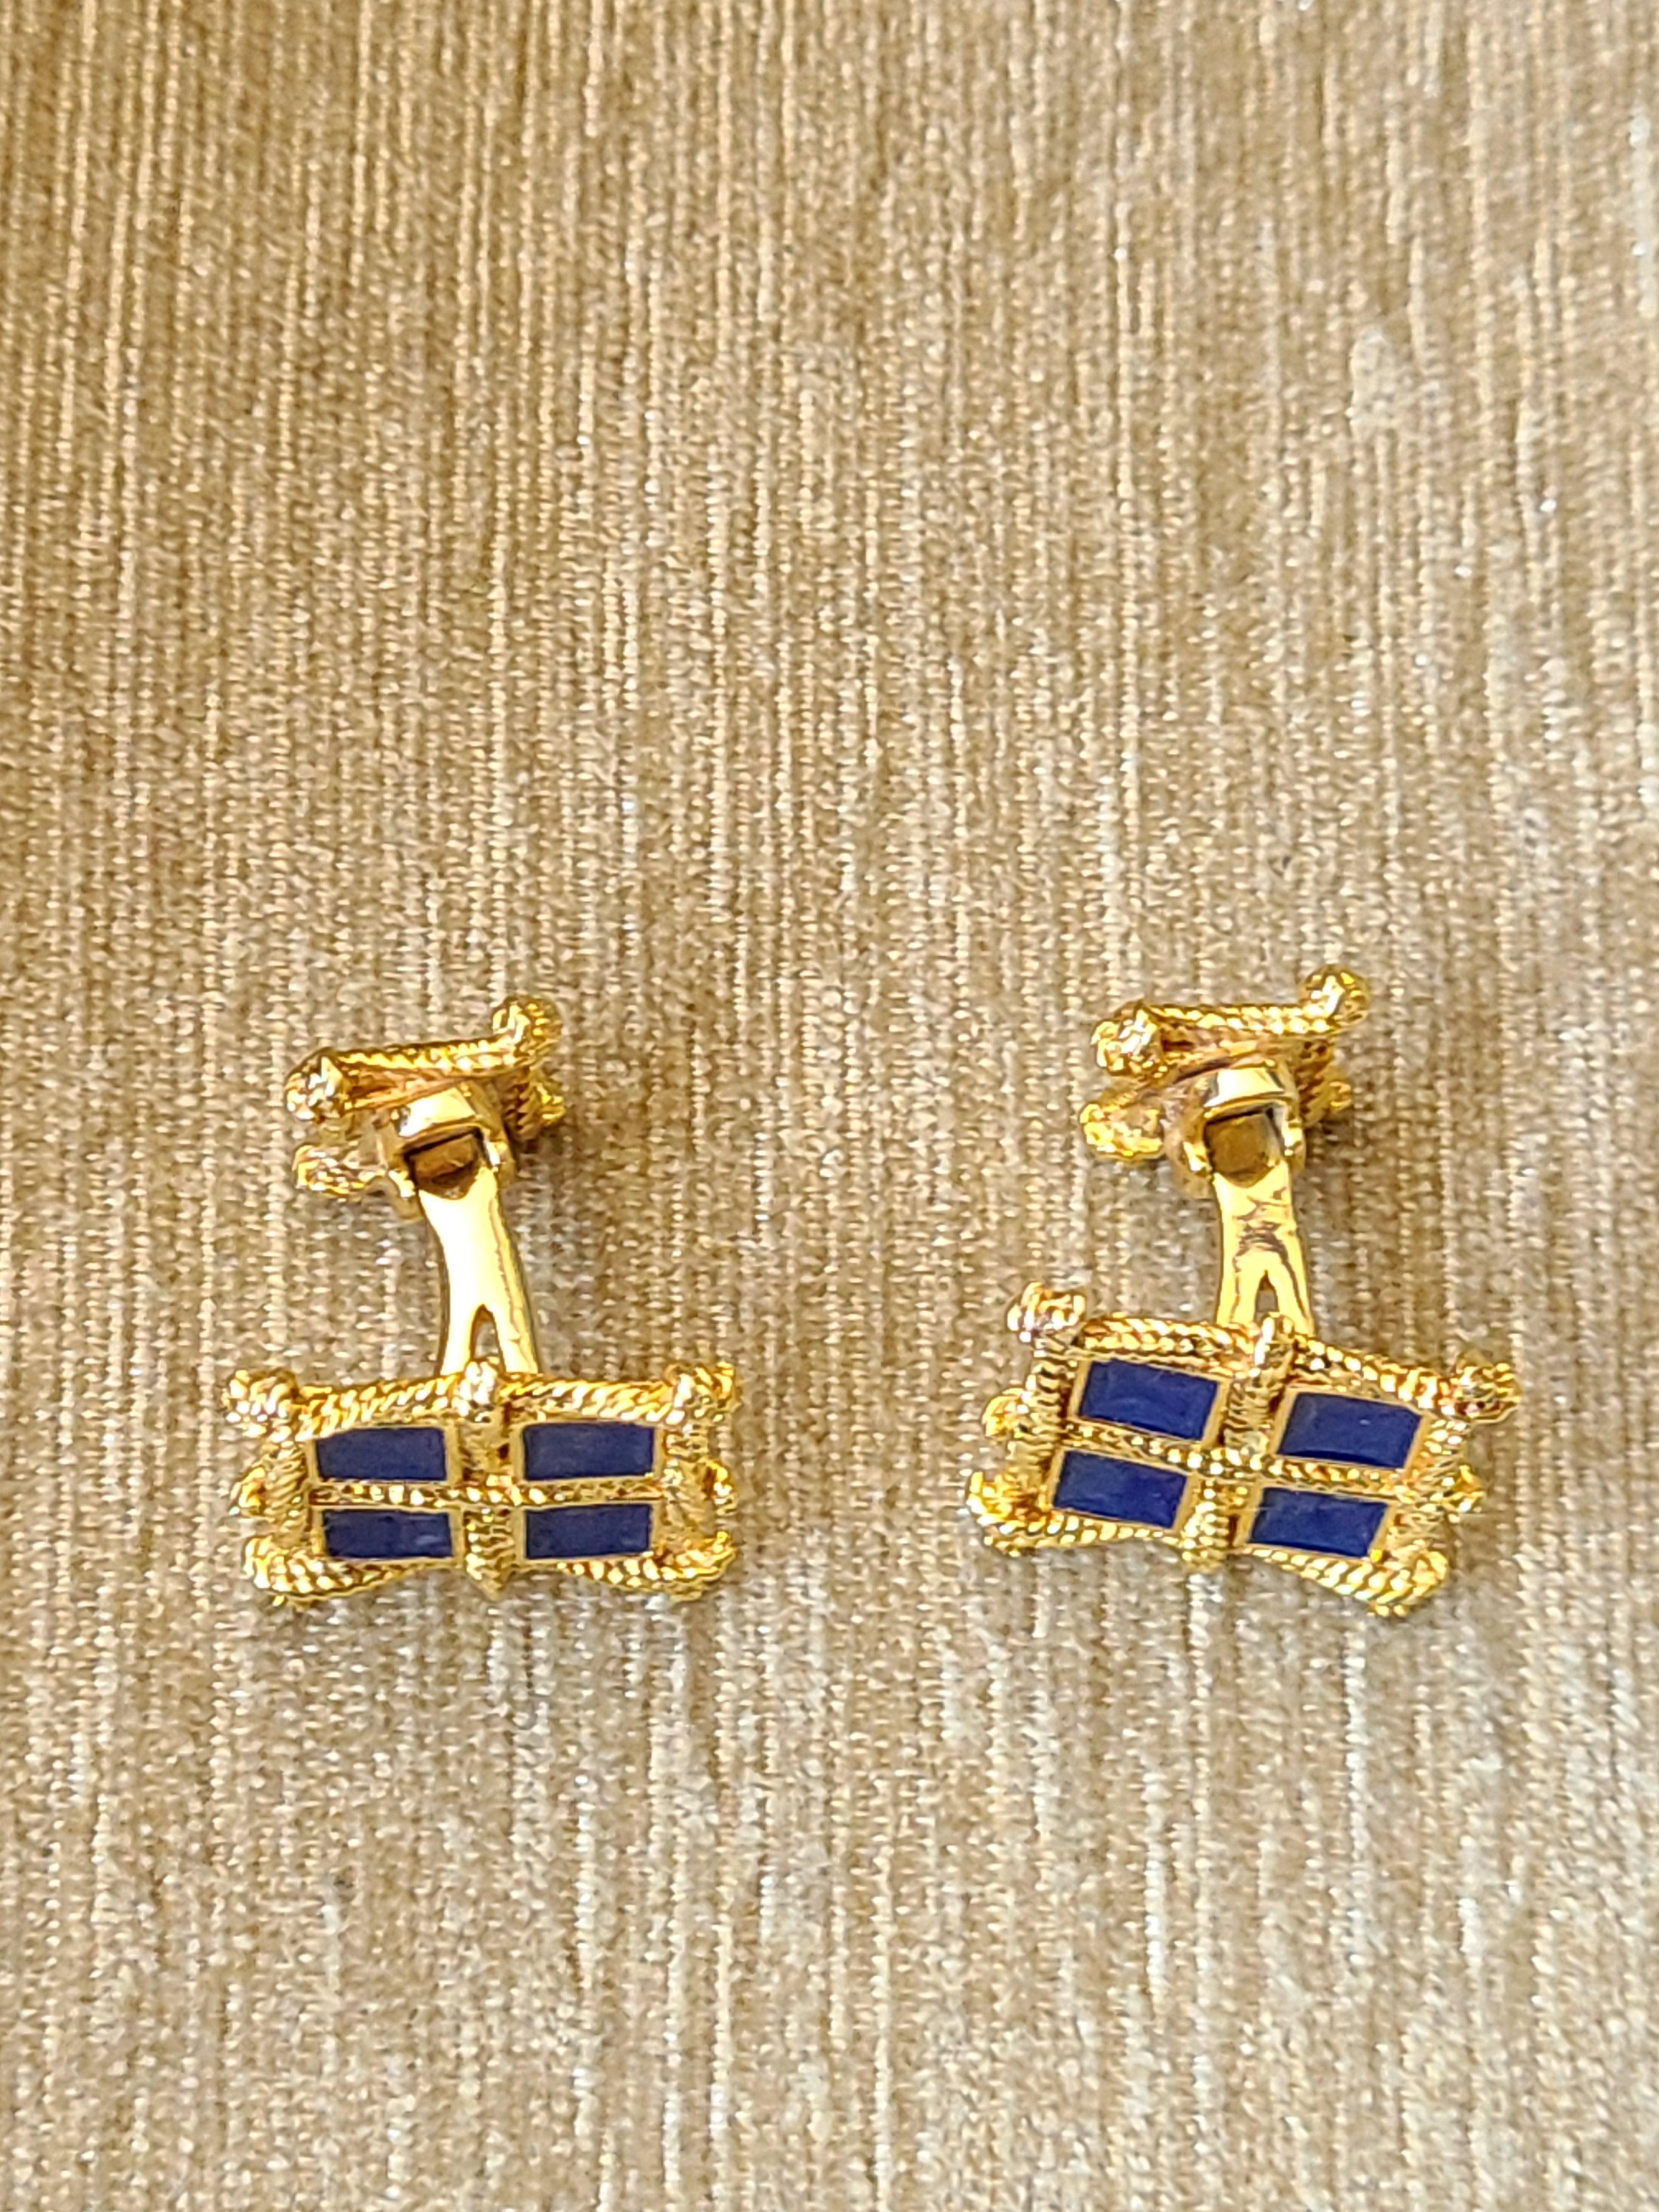 A high finish enamel cufflinks set in 14k yellow gold , The net gold weight is 13.47 grams and cufflinks dimension in cm 1.9 x 1.7 x 2 (LXWXD).